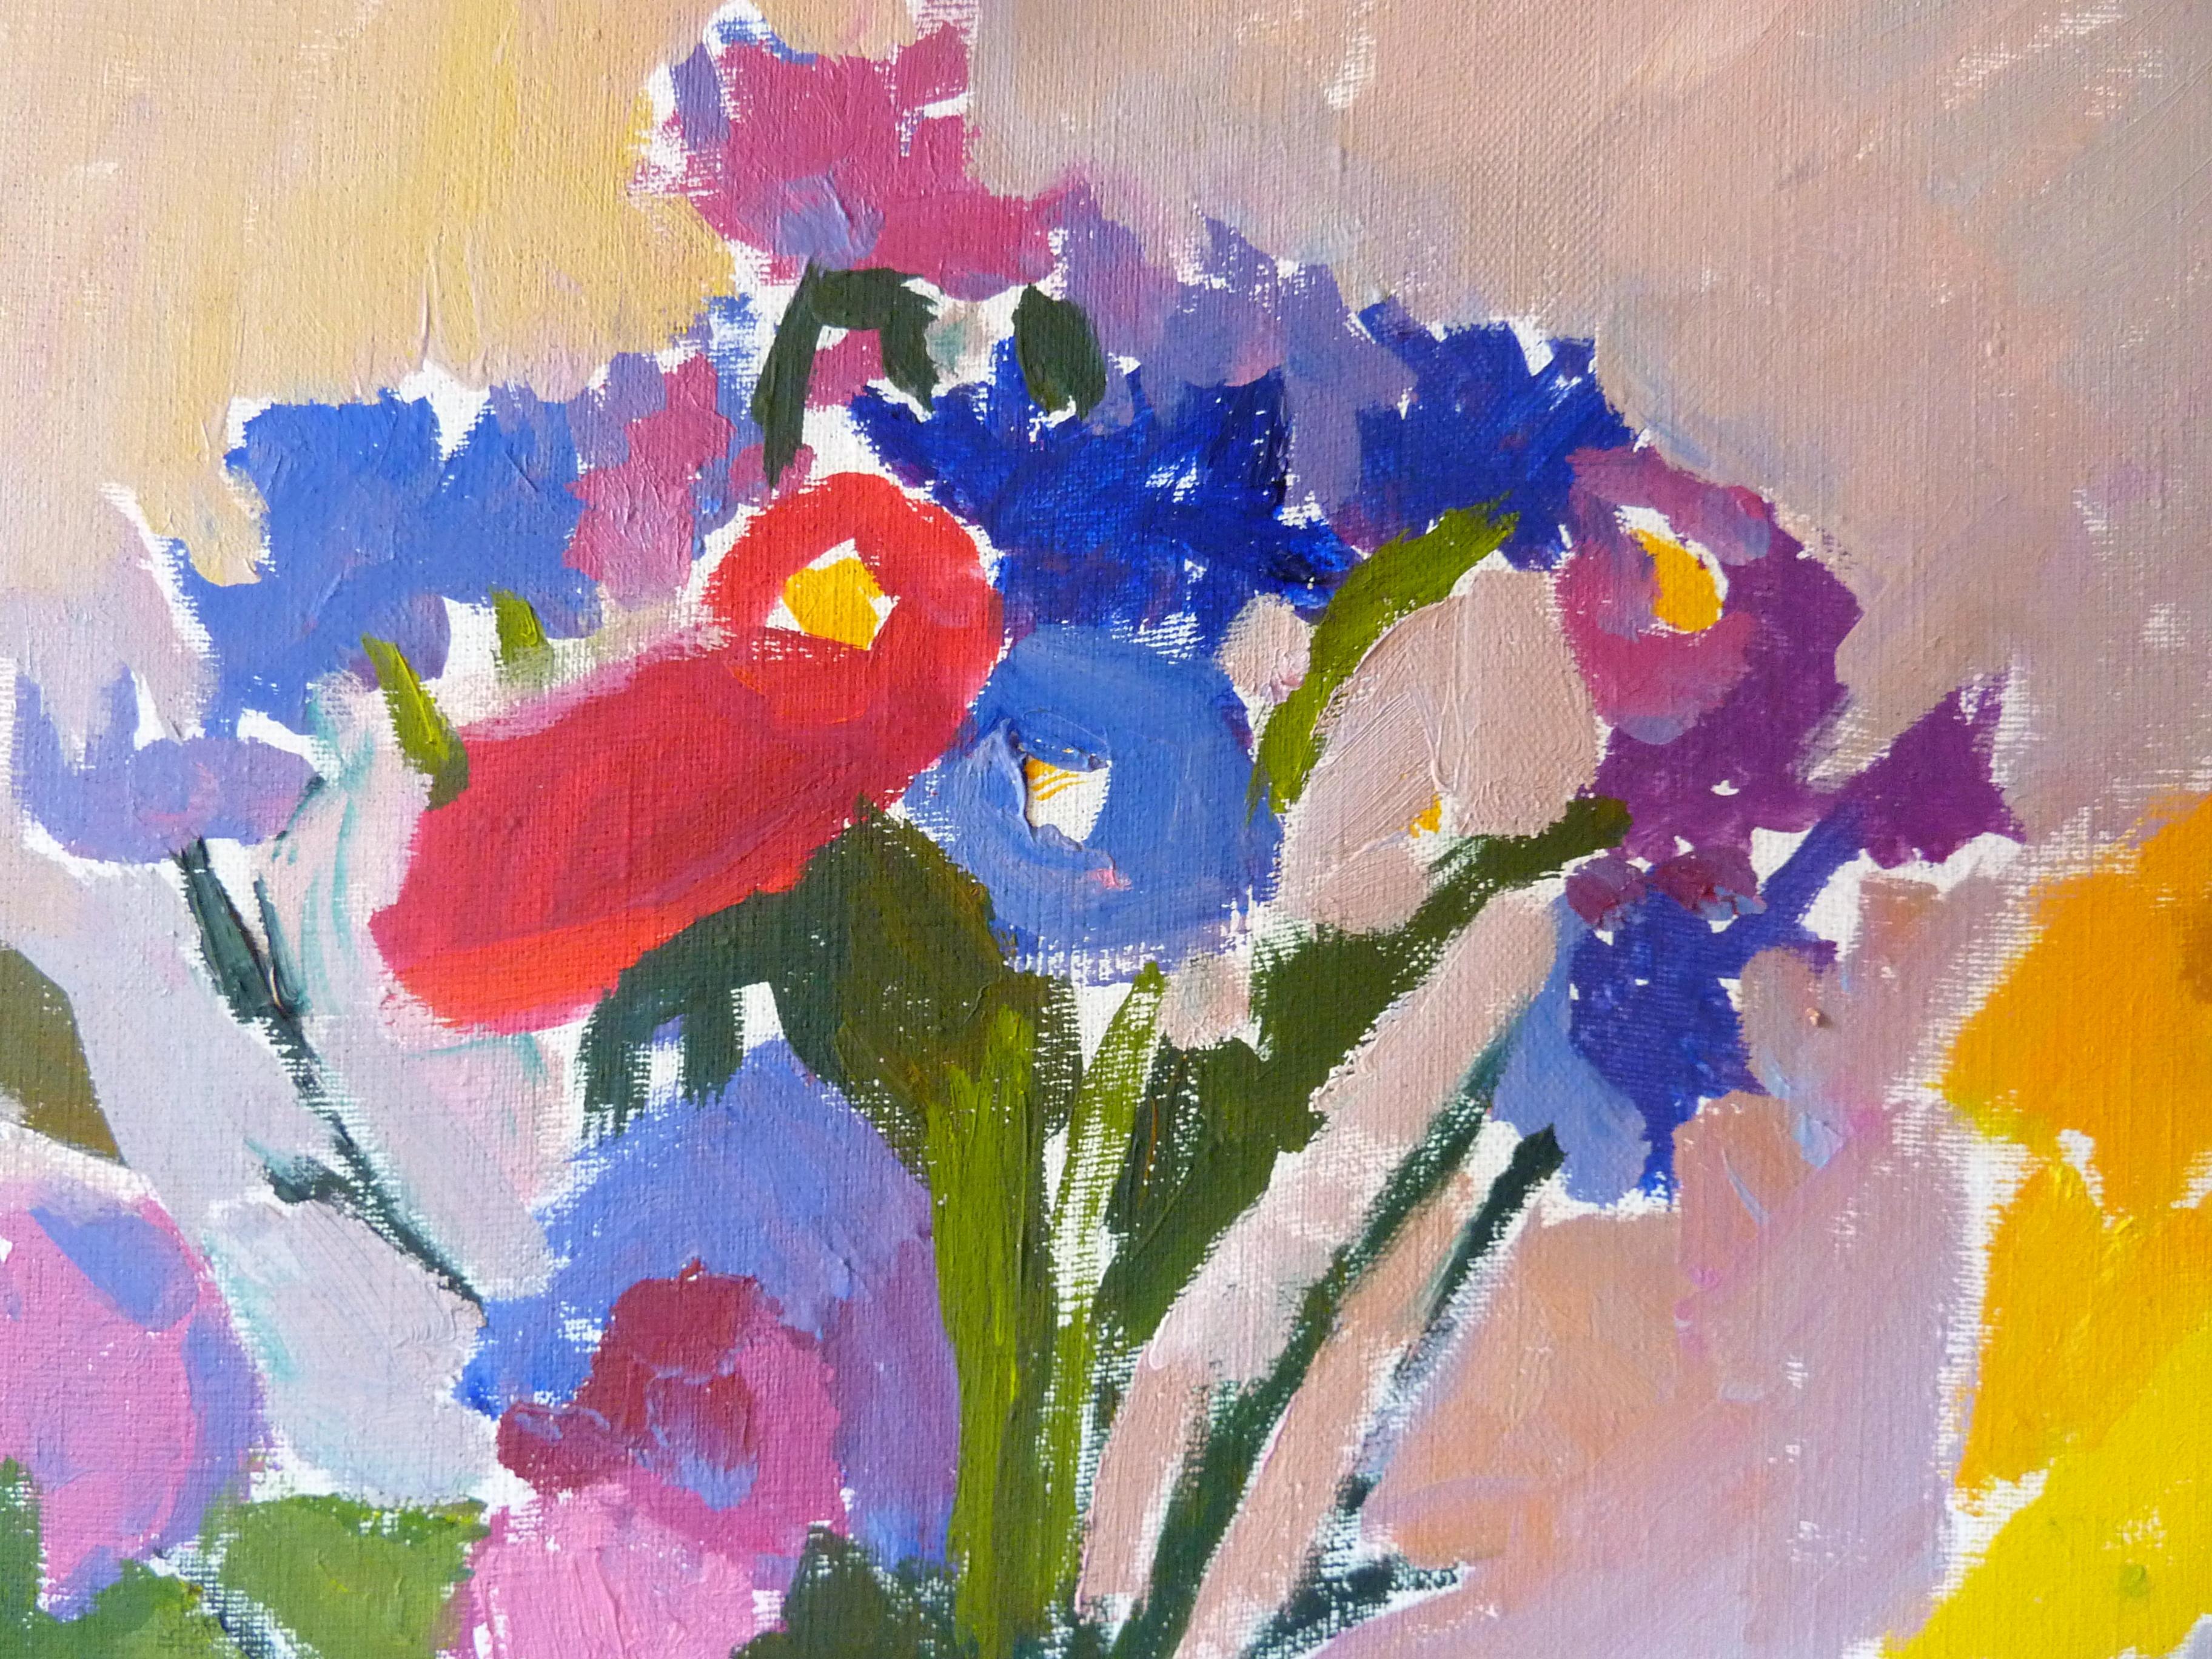 Summer Flowers - 21st Century Contemporary Fauvist Flower Oil Painting - Beige Figurative Painting by Nikol Klampert